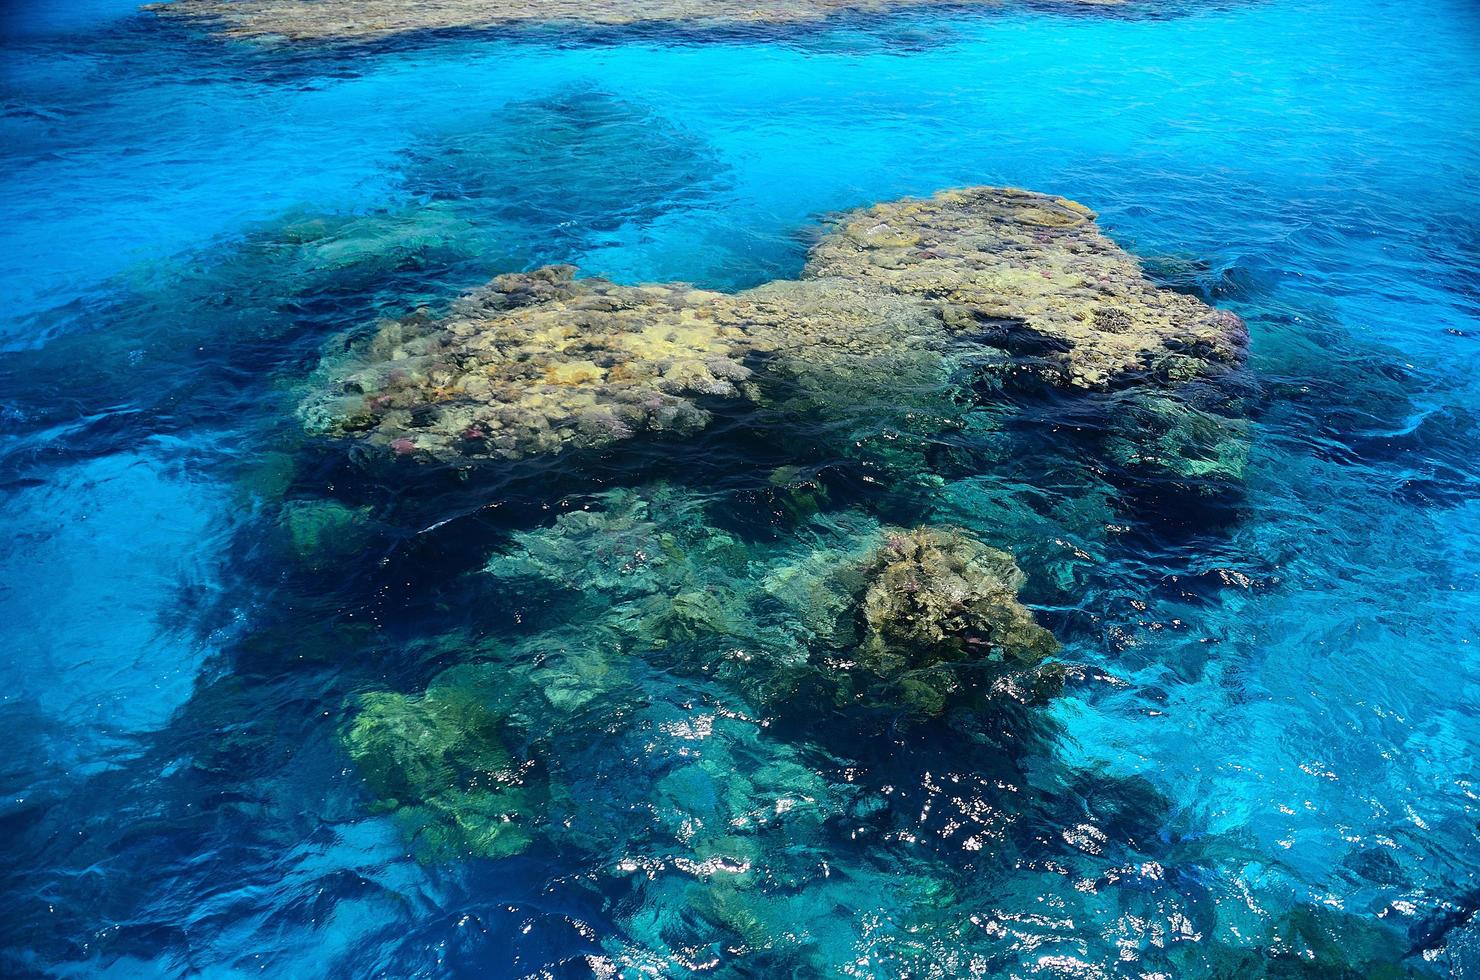 large coral stock in the blue sea water photo